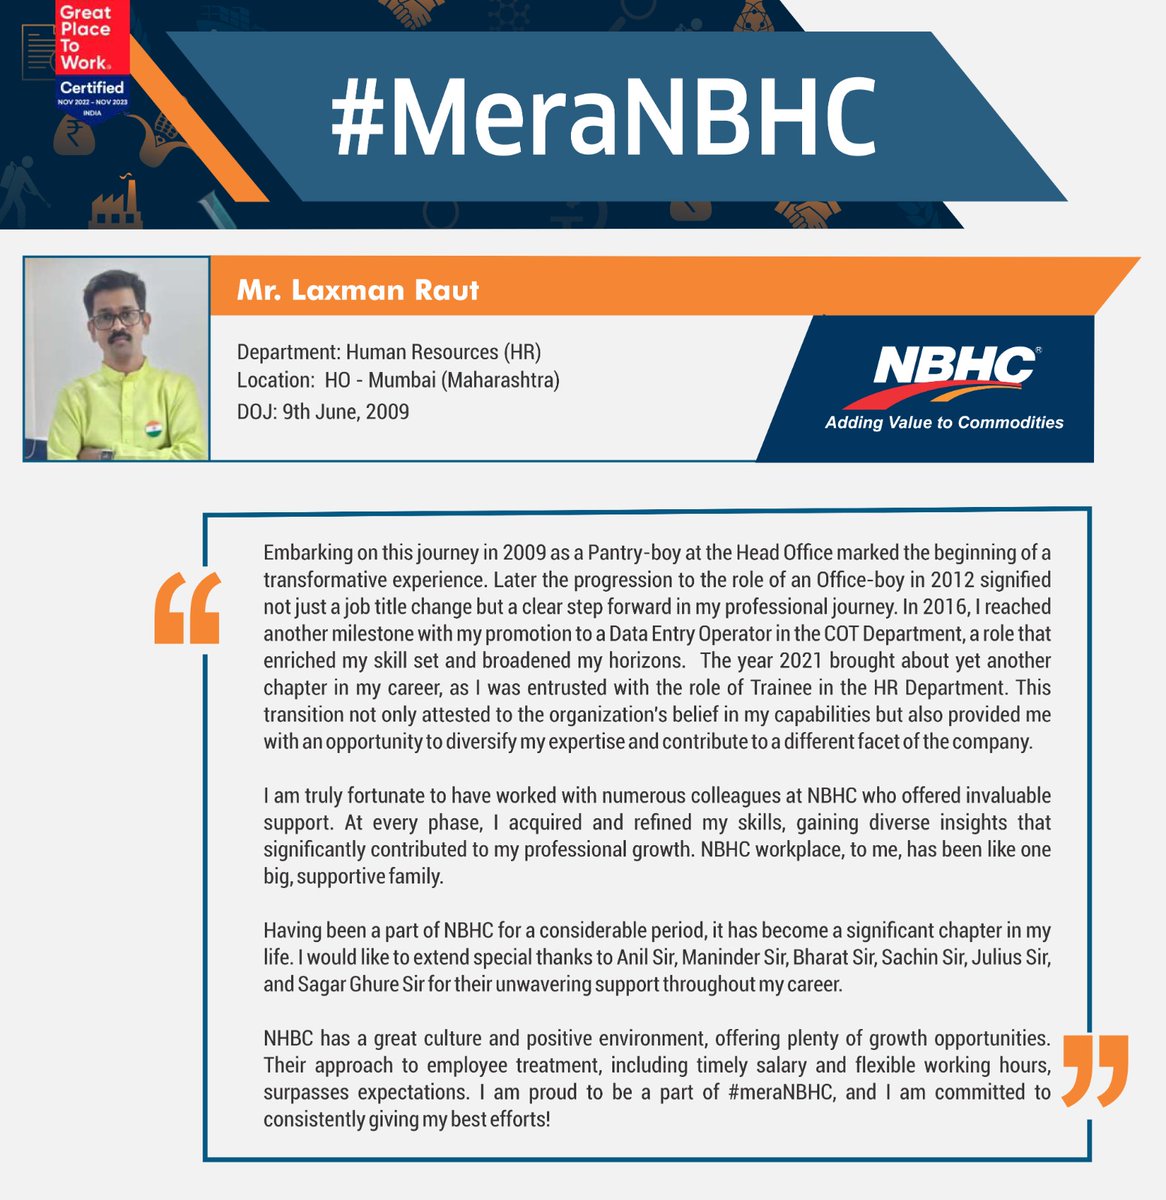 #MERANBHCSERIES ! At National Bulk Handling Corporation Pvt Ltd (NBHC), we strongly believe in #fostering an enabling #workenvironment and #enrichinglives and #talents. Thank You Mr. Laxman Raut for sharing your valuable views on #meranbhc. Wishing you #goodluck